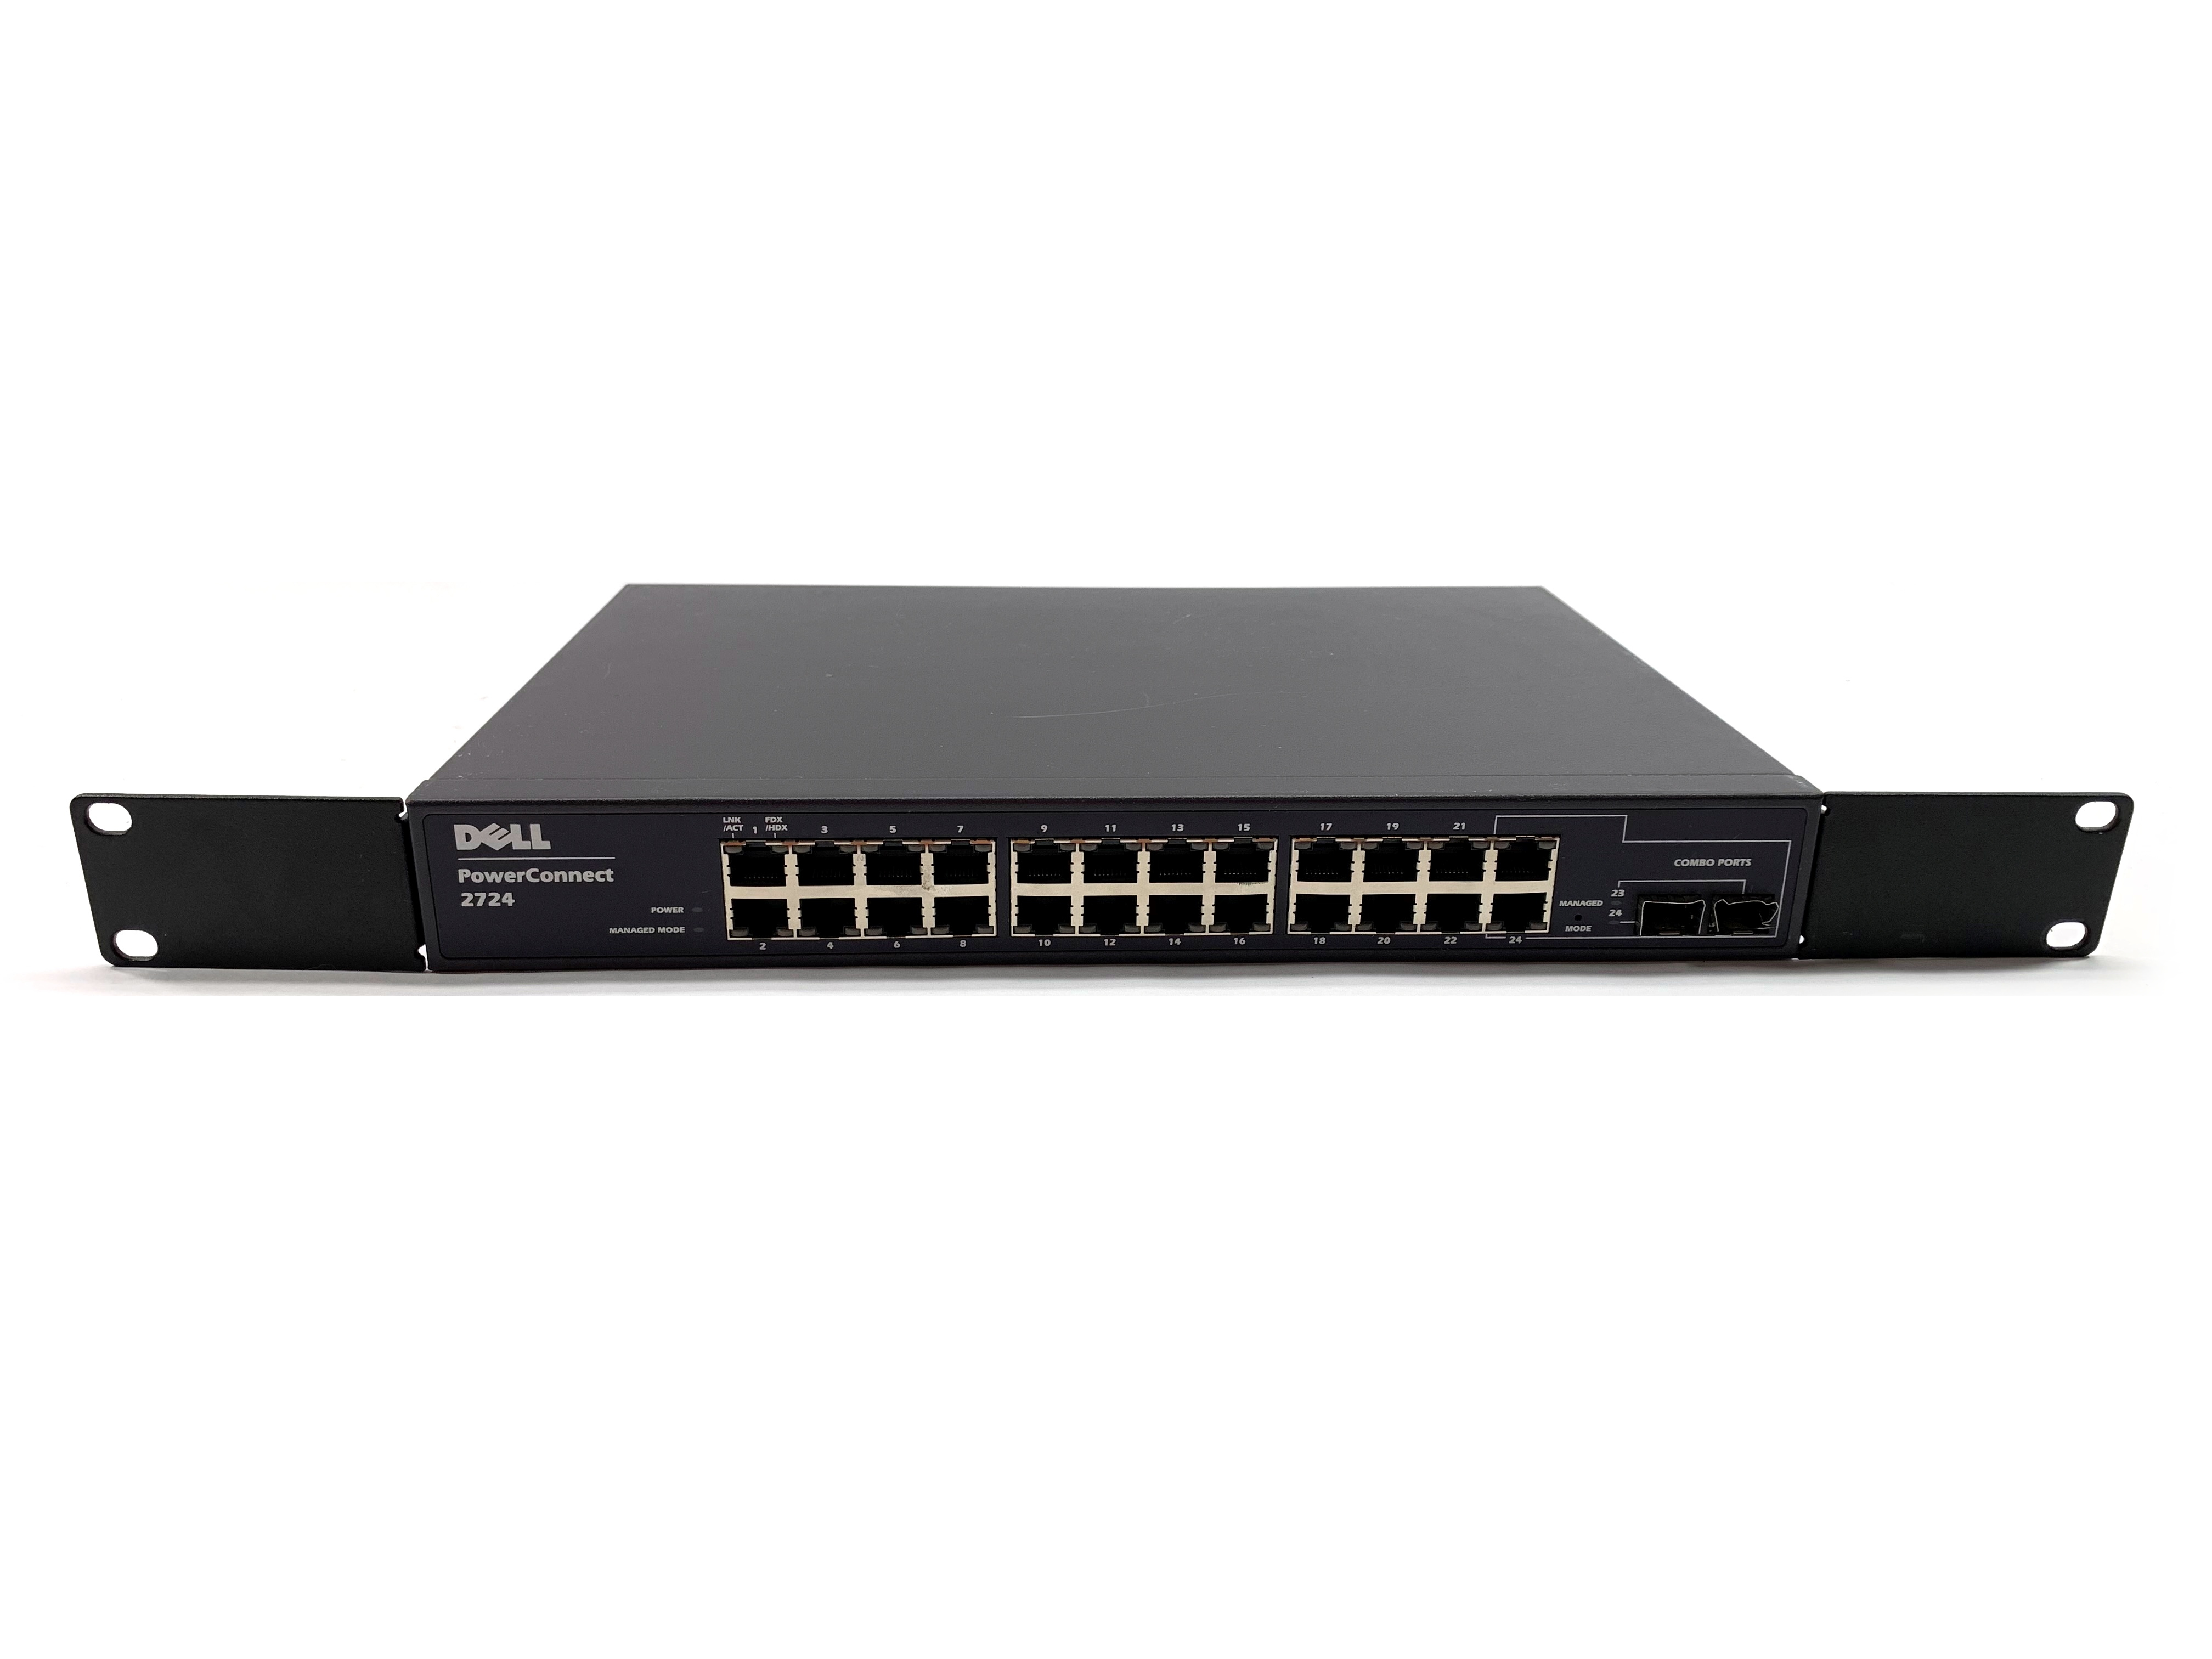 Dell PowerConnect 2824 F491K 24-Port Gigabit Managed Switch w/ Rack Ears 